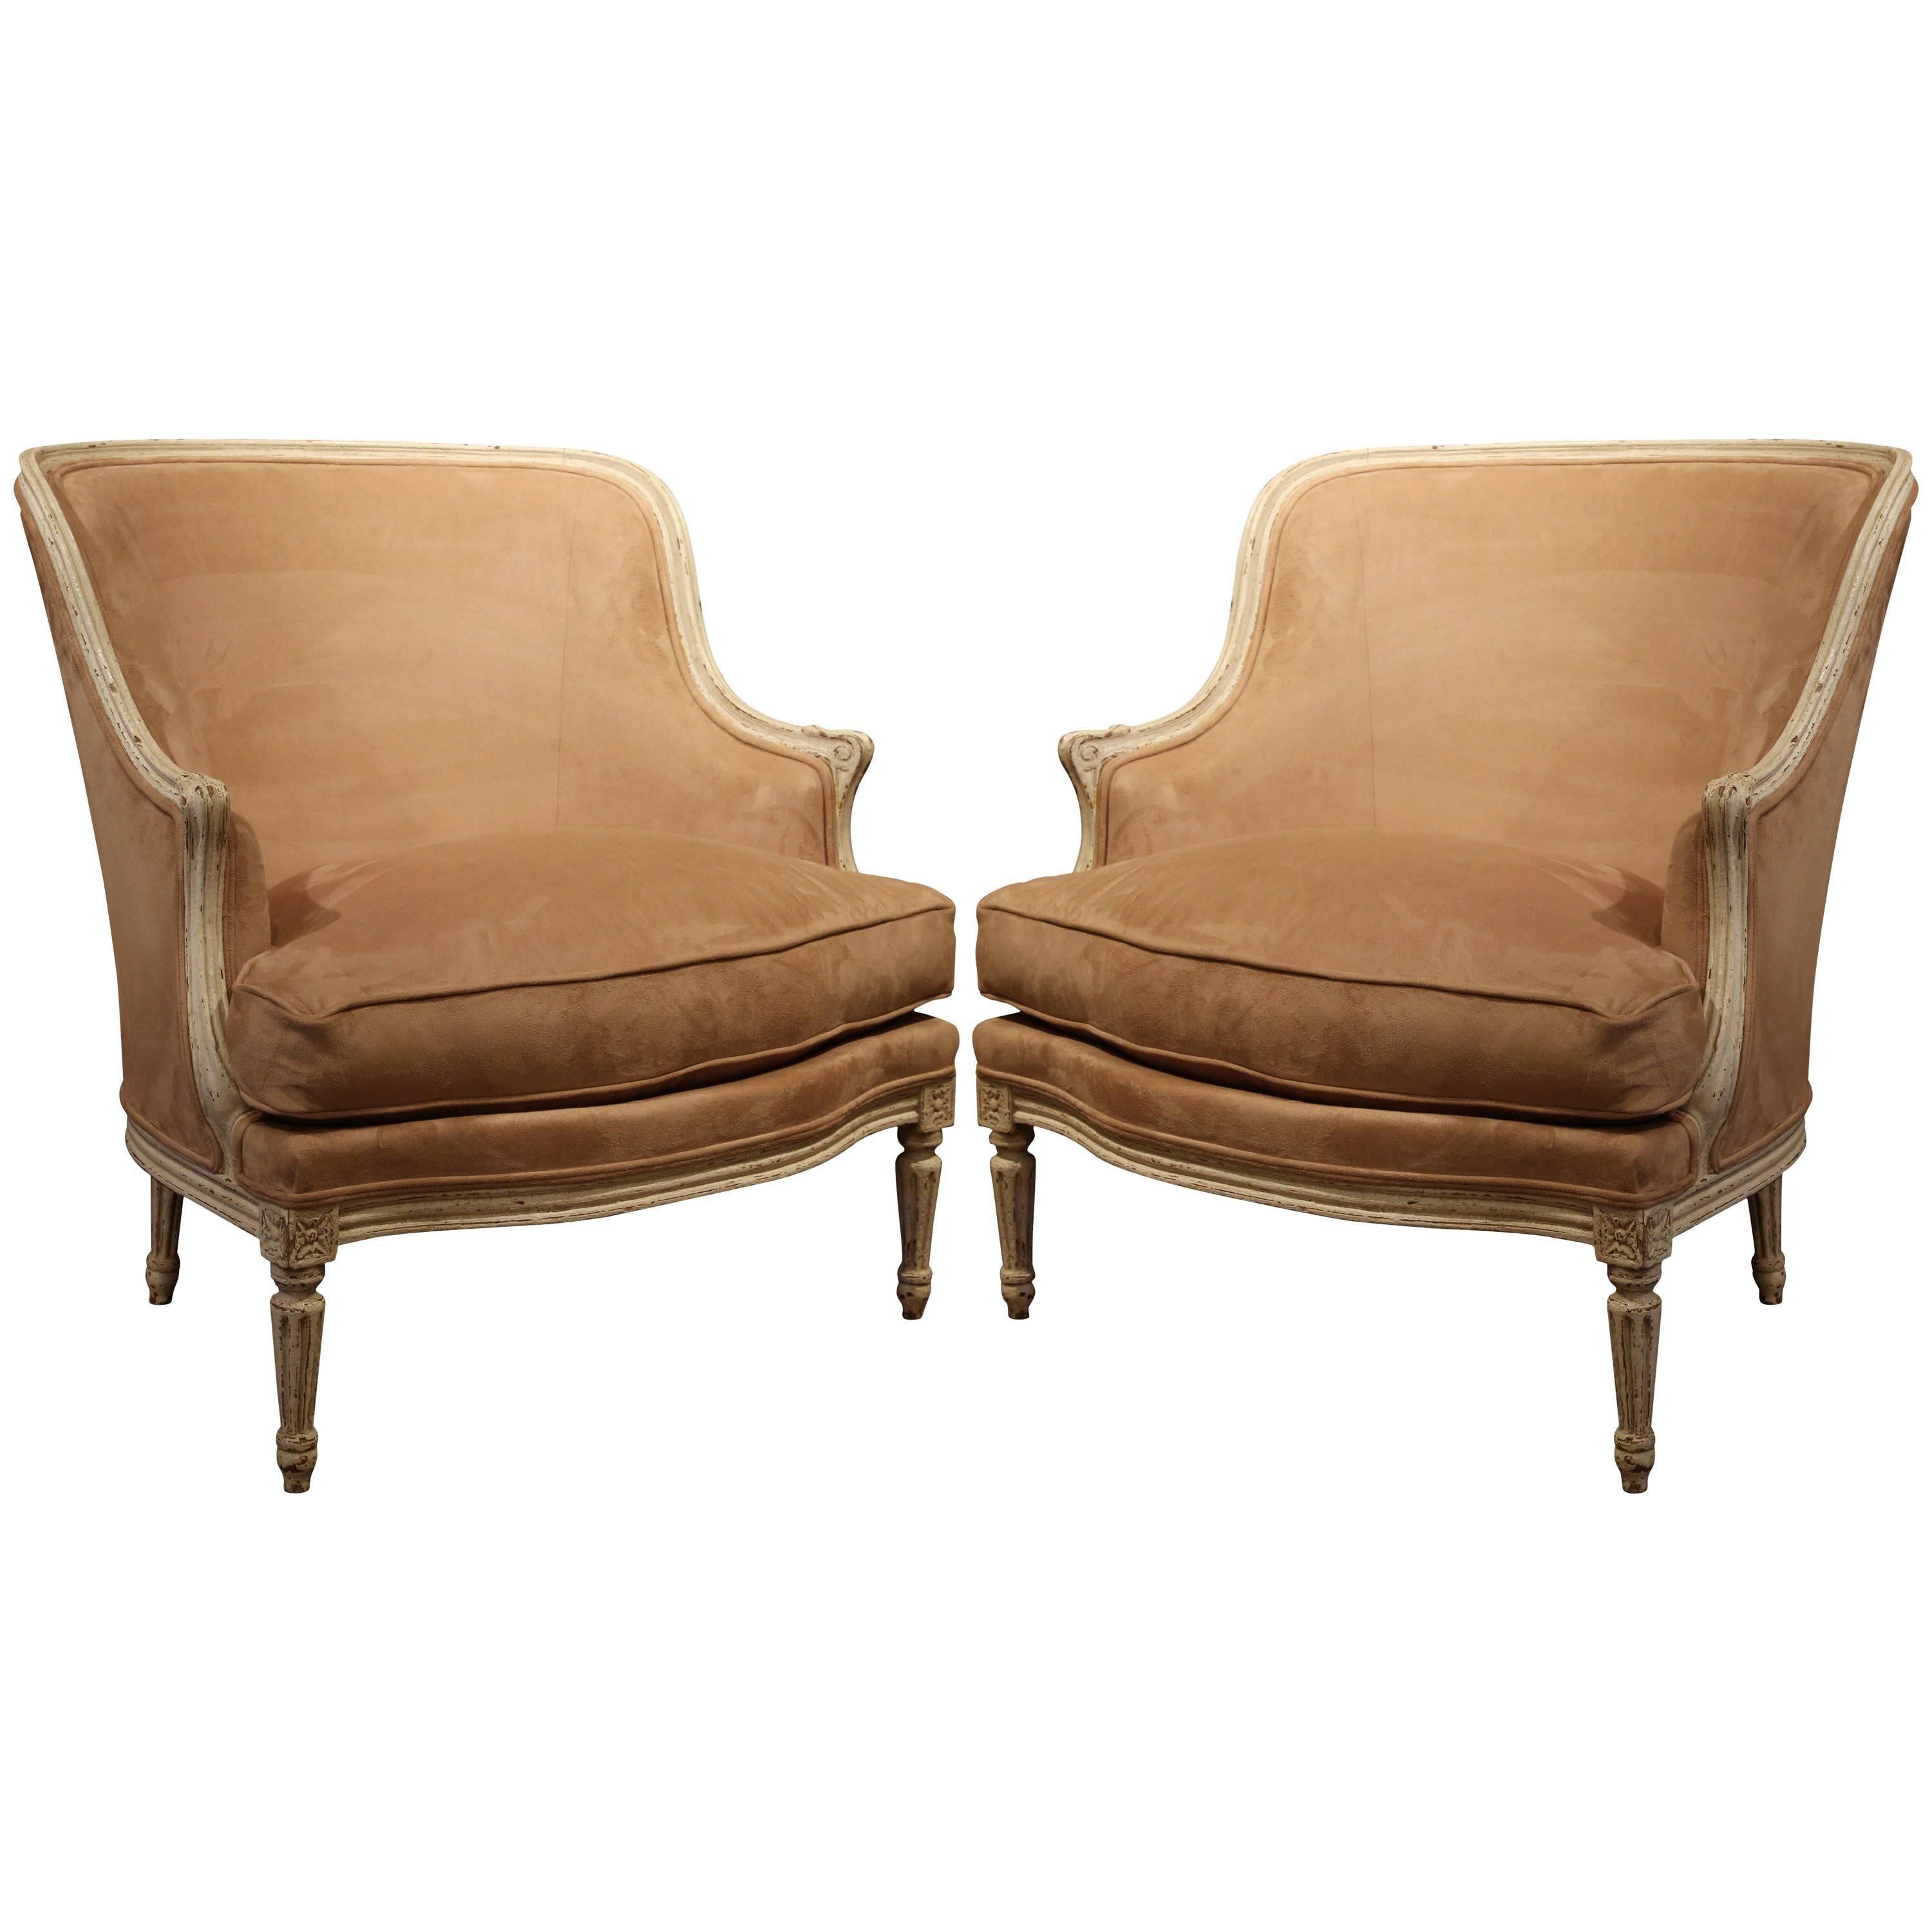 Pair of 19th Century French Louis XVI Carved Painted Armchairs with Suede Fabric